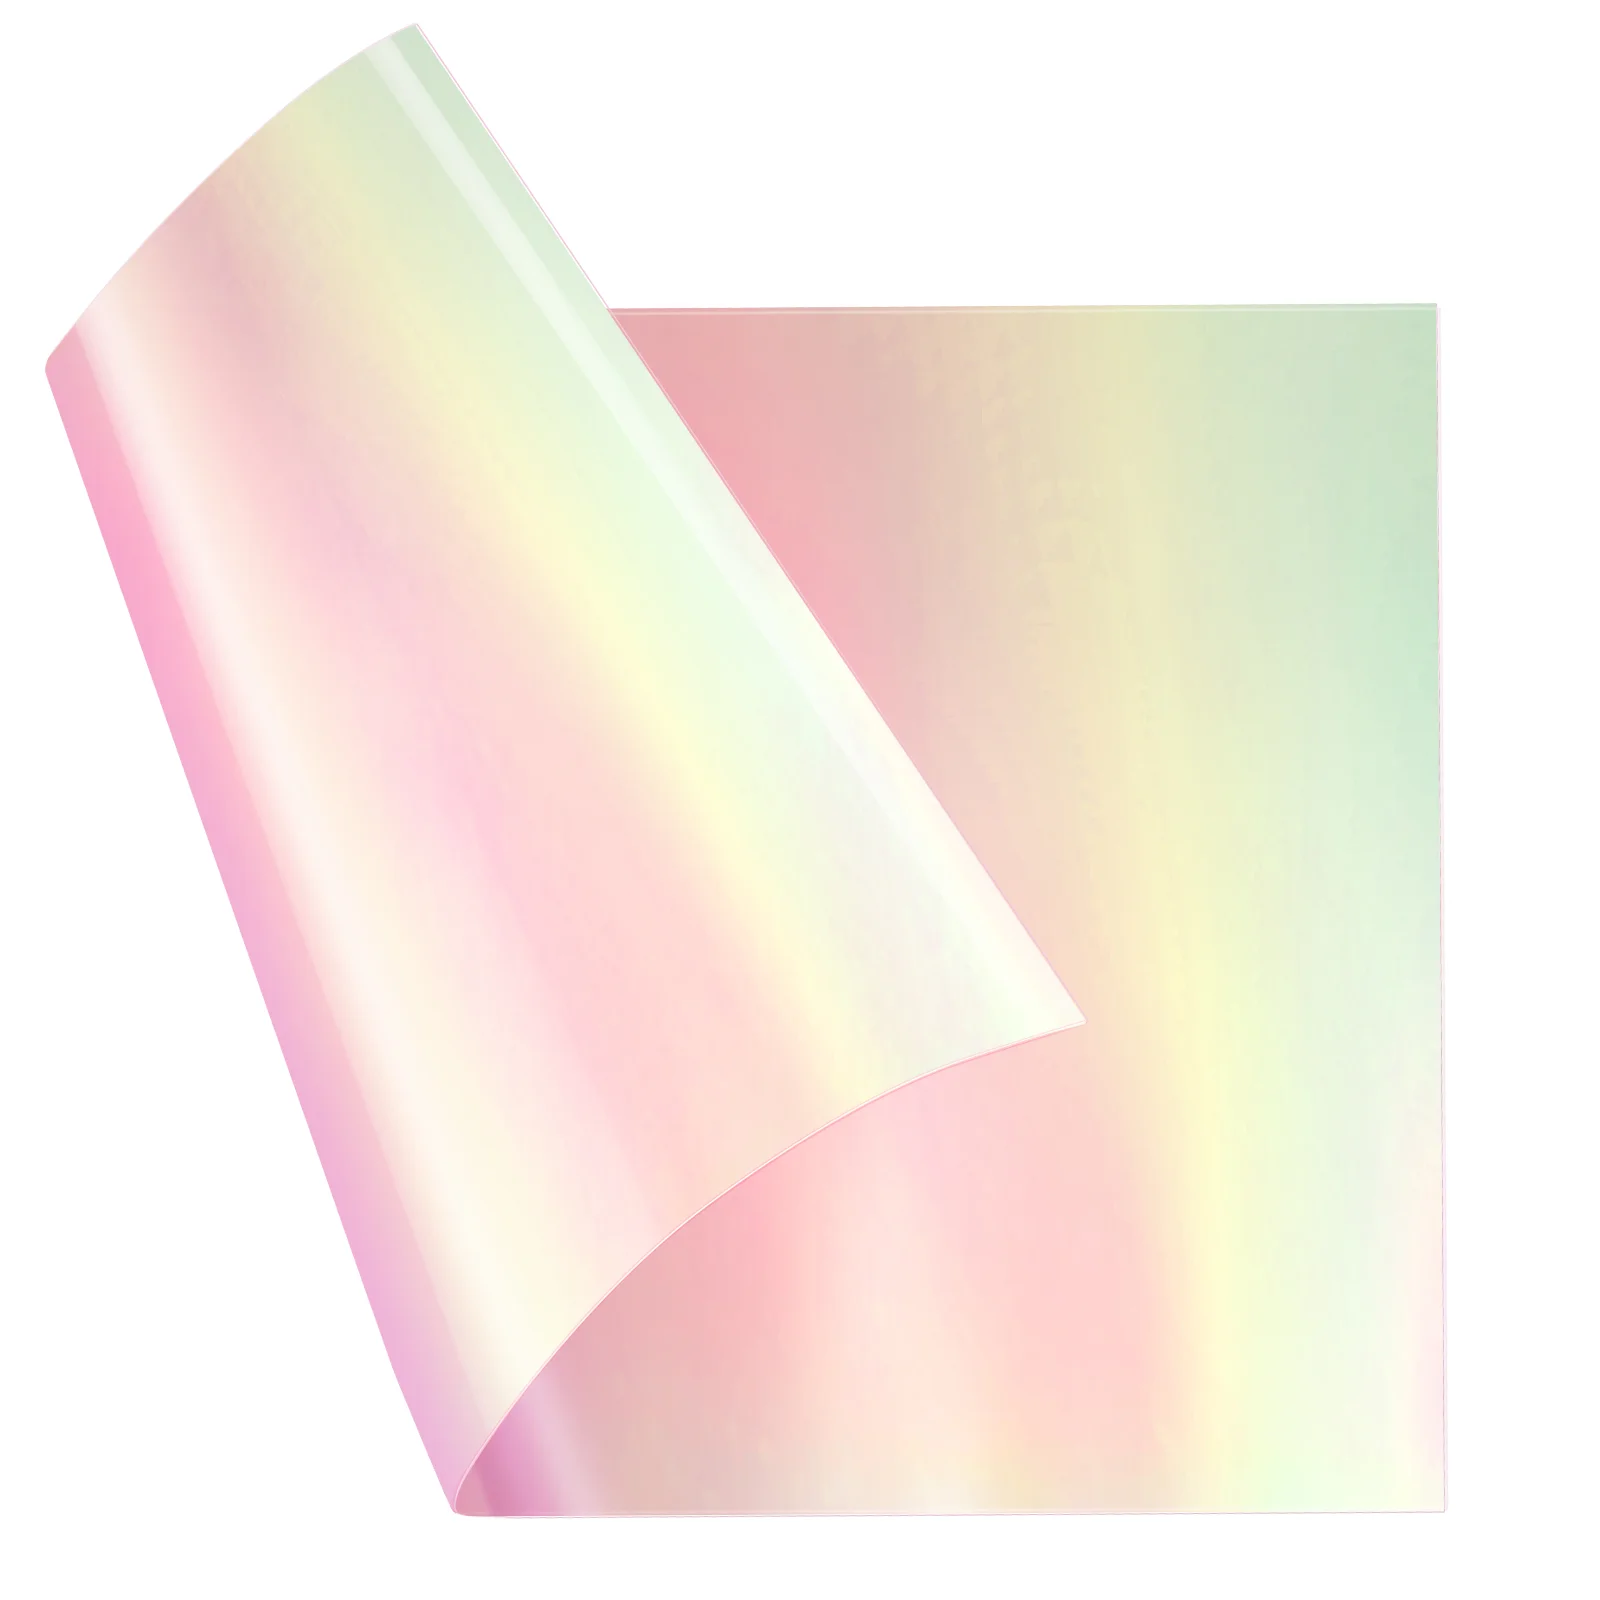 

Film Cellophane Paper Wrapping Iridescent Wrap Holographic Flower Roll Rainbow Gift Packing Diy Sheets Colored Effect Florist